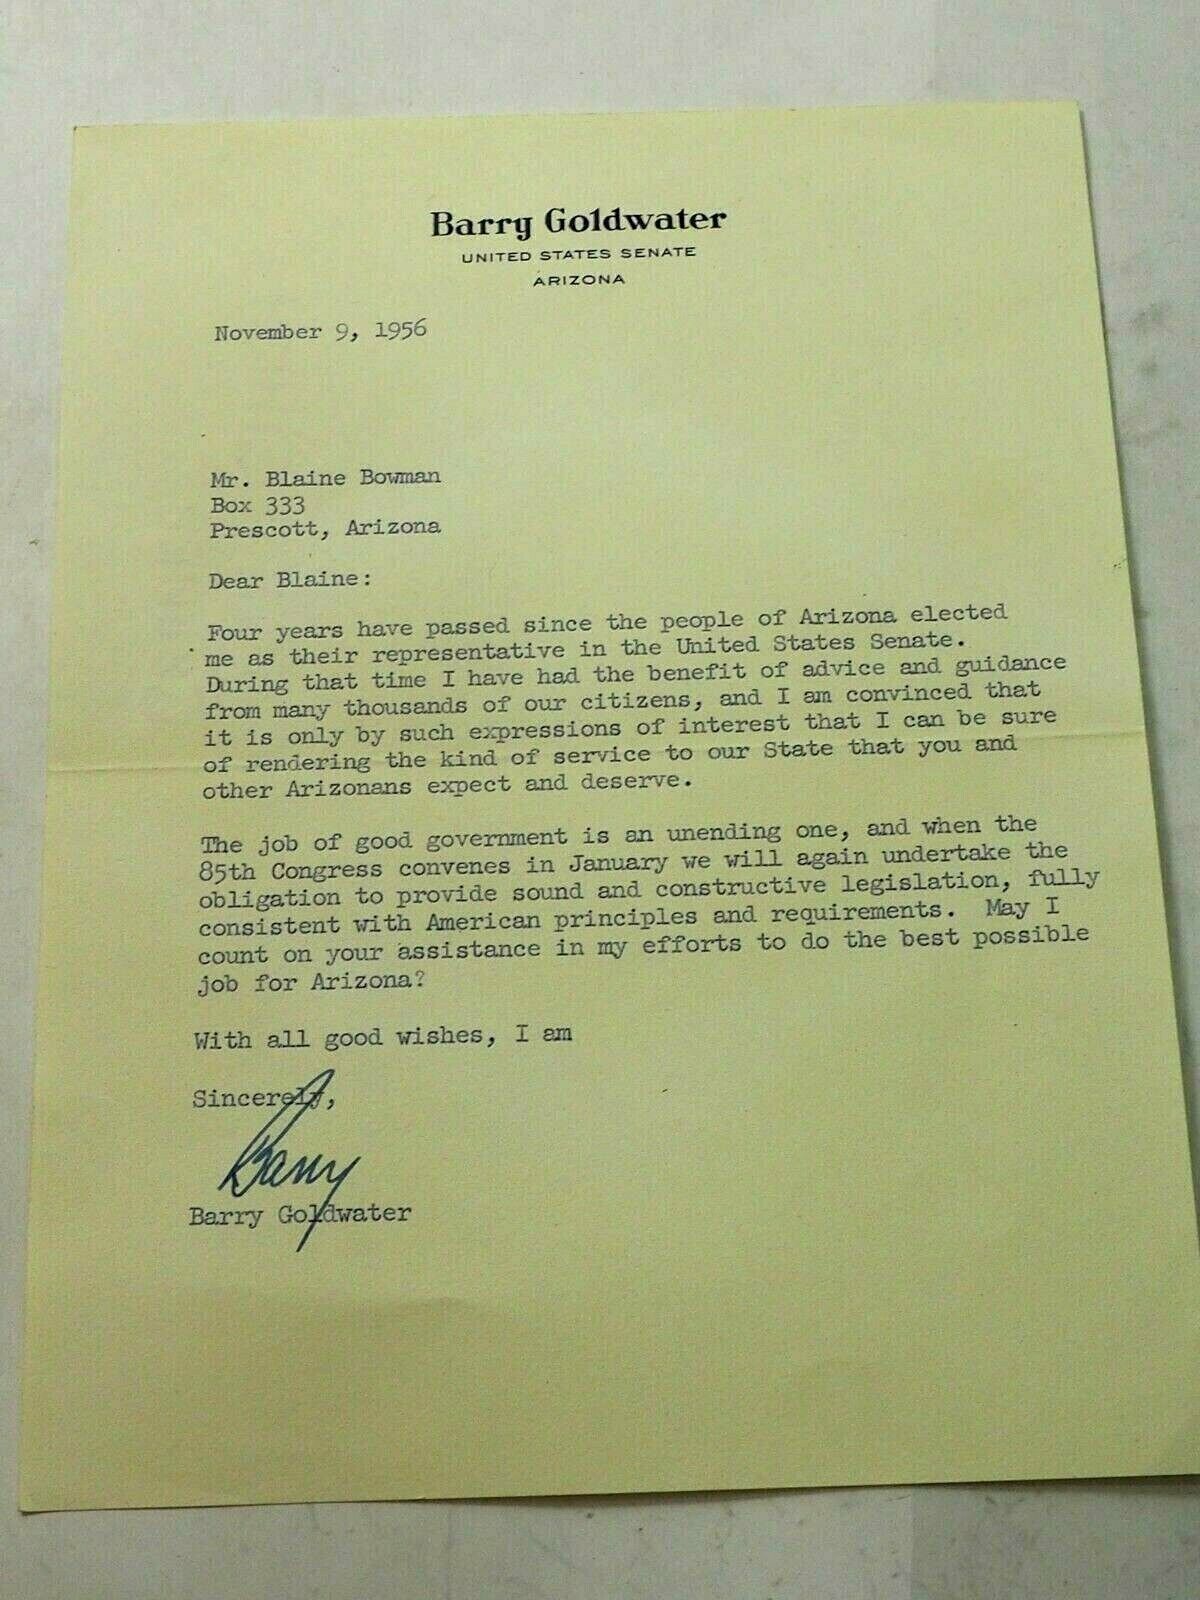 1956 BARRY GOLDWATER Letter SIGNED to Blaine Bowman asking for support